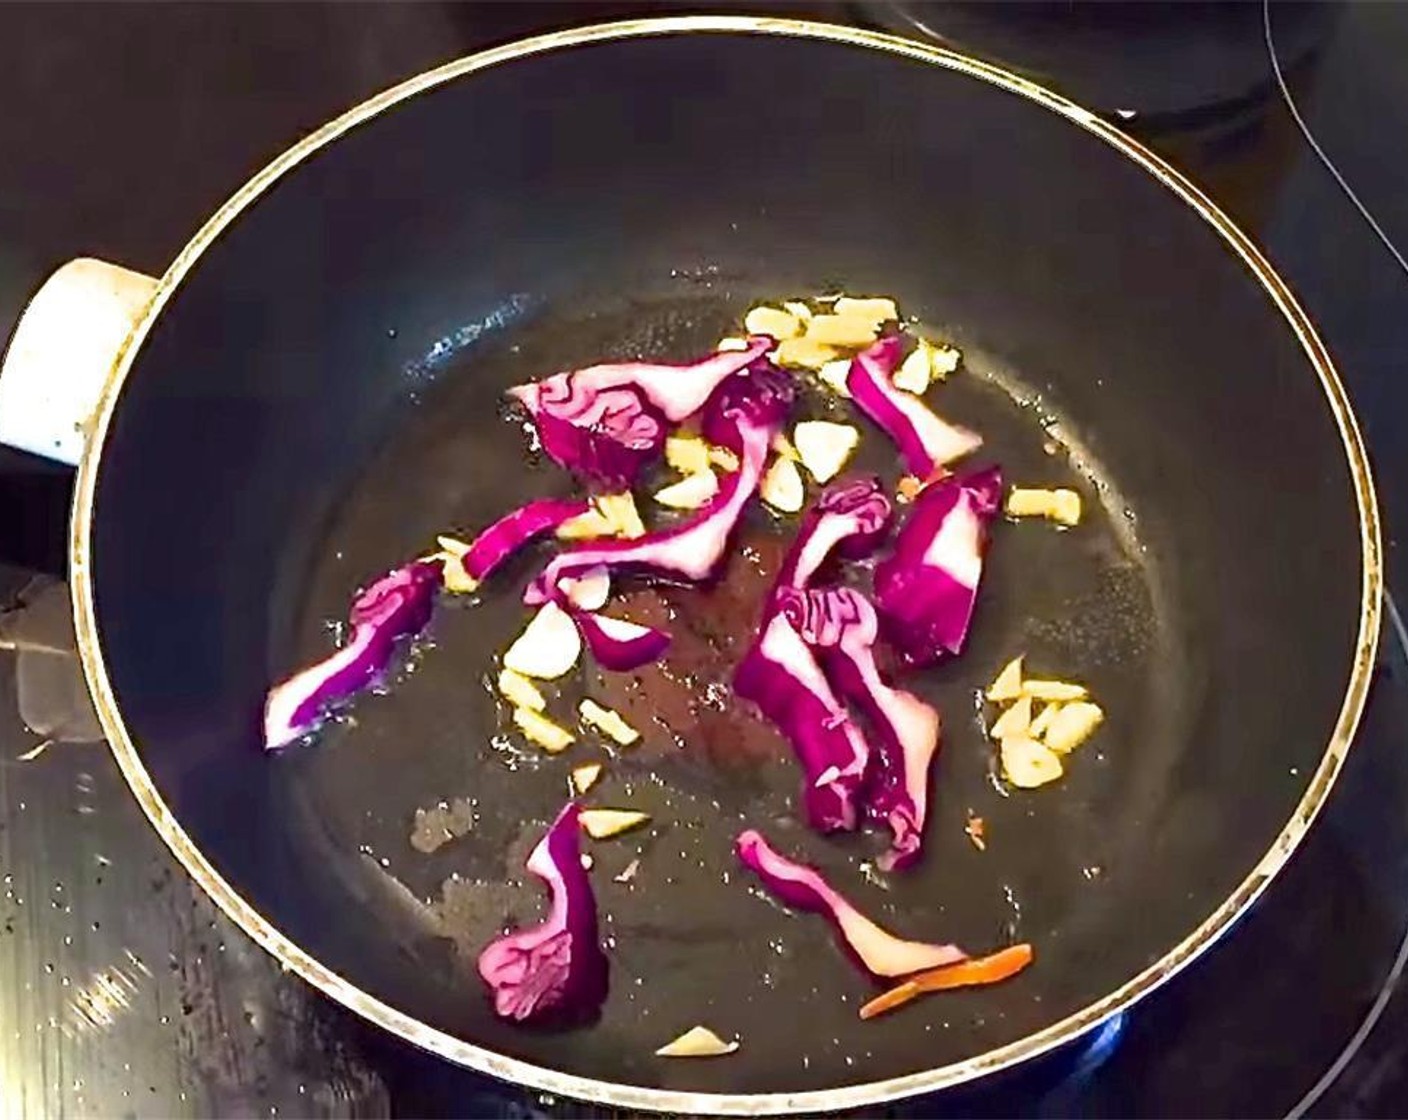 step 2 Brown the ginger and garlic in a pan with Coconut Oil (2 Tbsp). Add carrots, purple cabbage, red pepper, and kale, and saute for about 1-2 minutes.